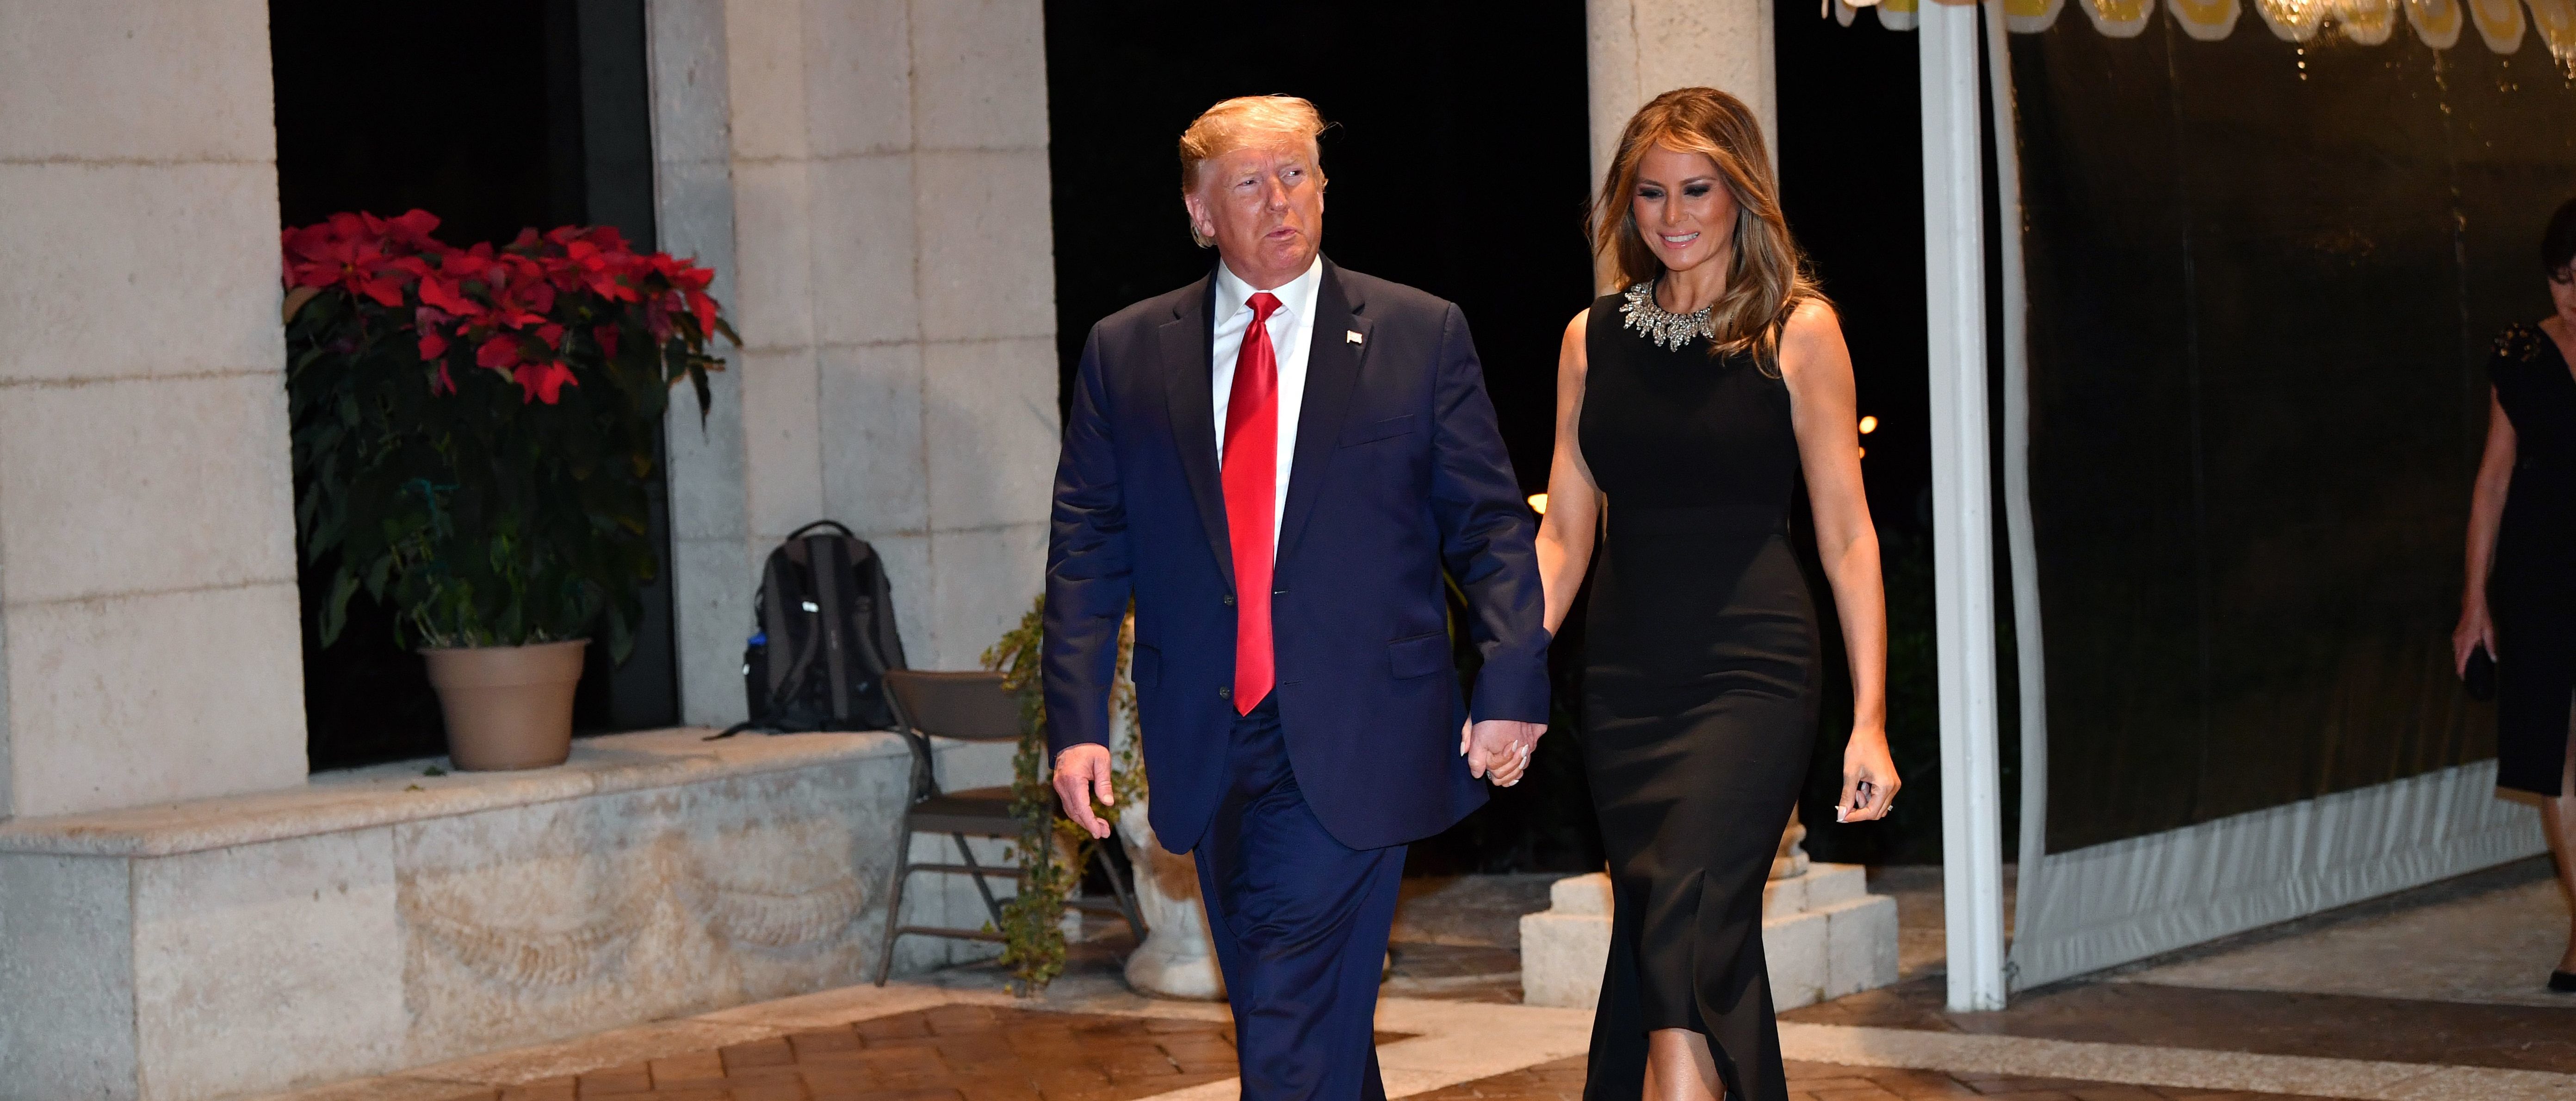 US President Donald Trump and First Lady Melania Trump arrive for a Christmas Eve dinner with his family at Mar-A-Lago in Palm Beach, Florida on Dec. 24, 2019. (Photo by NICHOLAS KAMM/AFP via Getty Images)